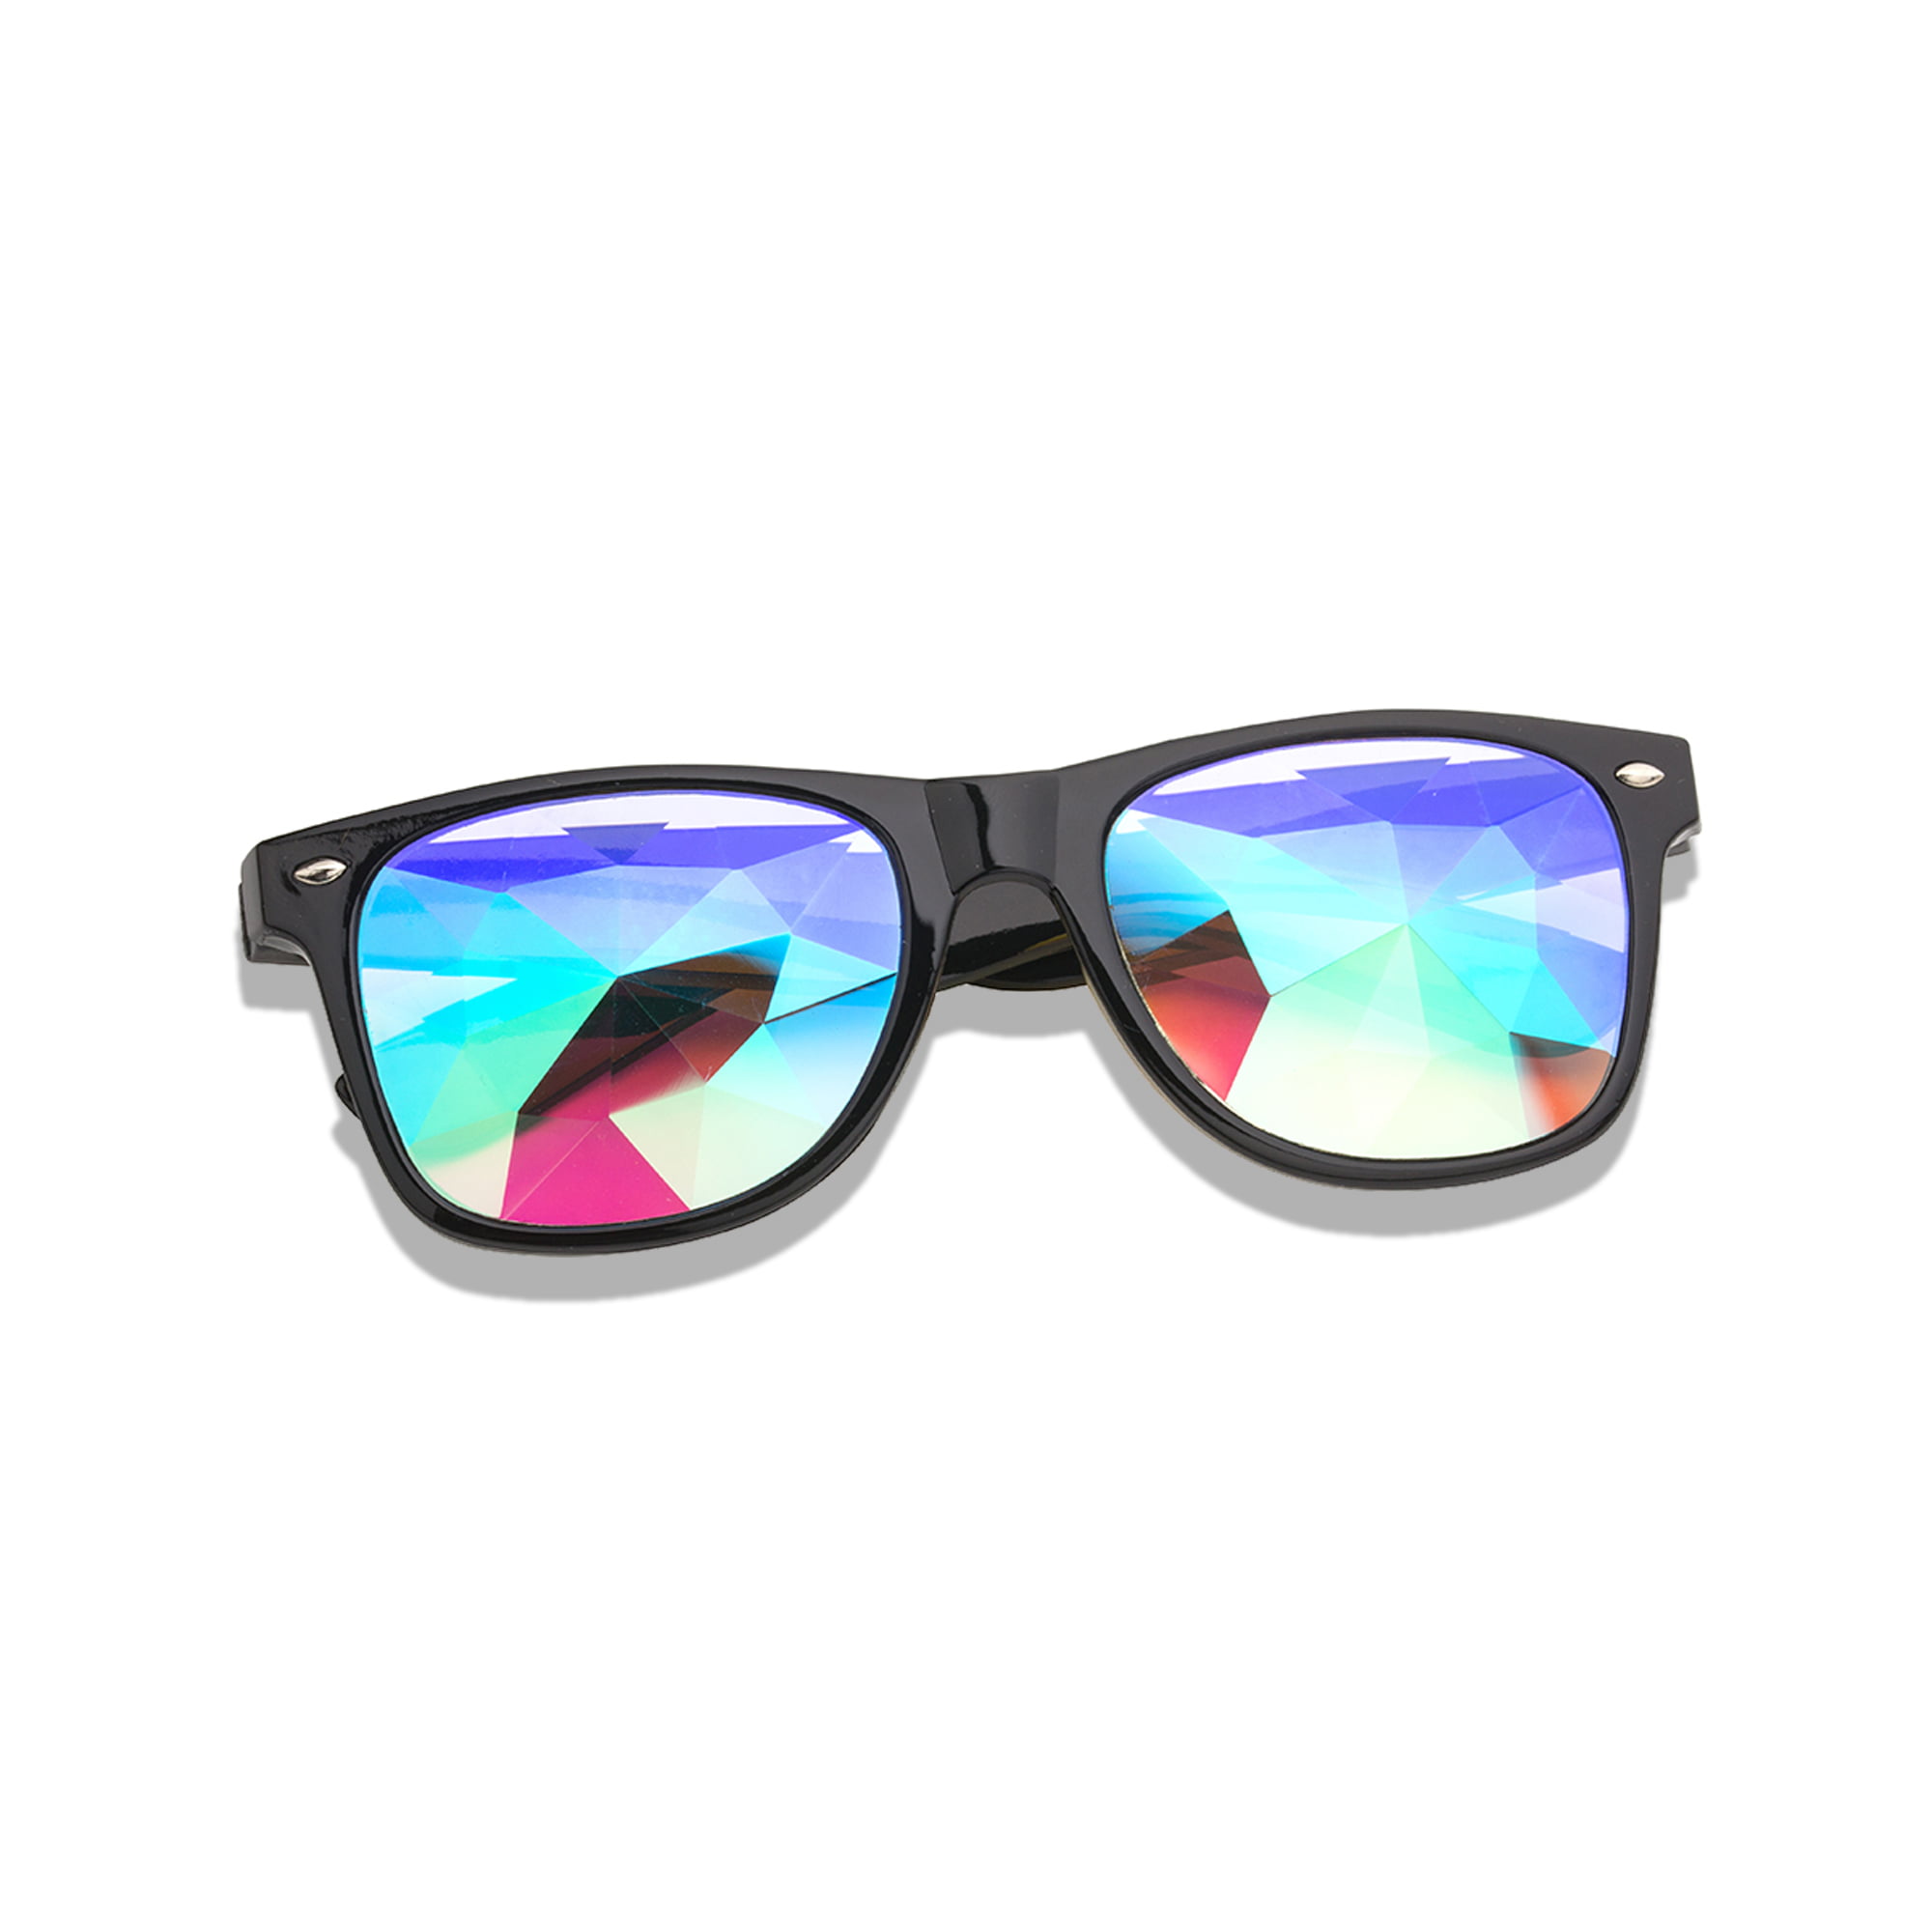 Reflective Festival Laser Glasses - Led Sunglasses For Parties & Events